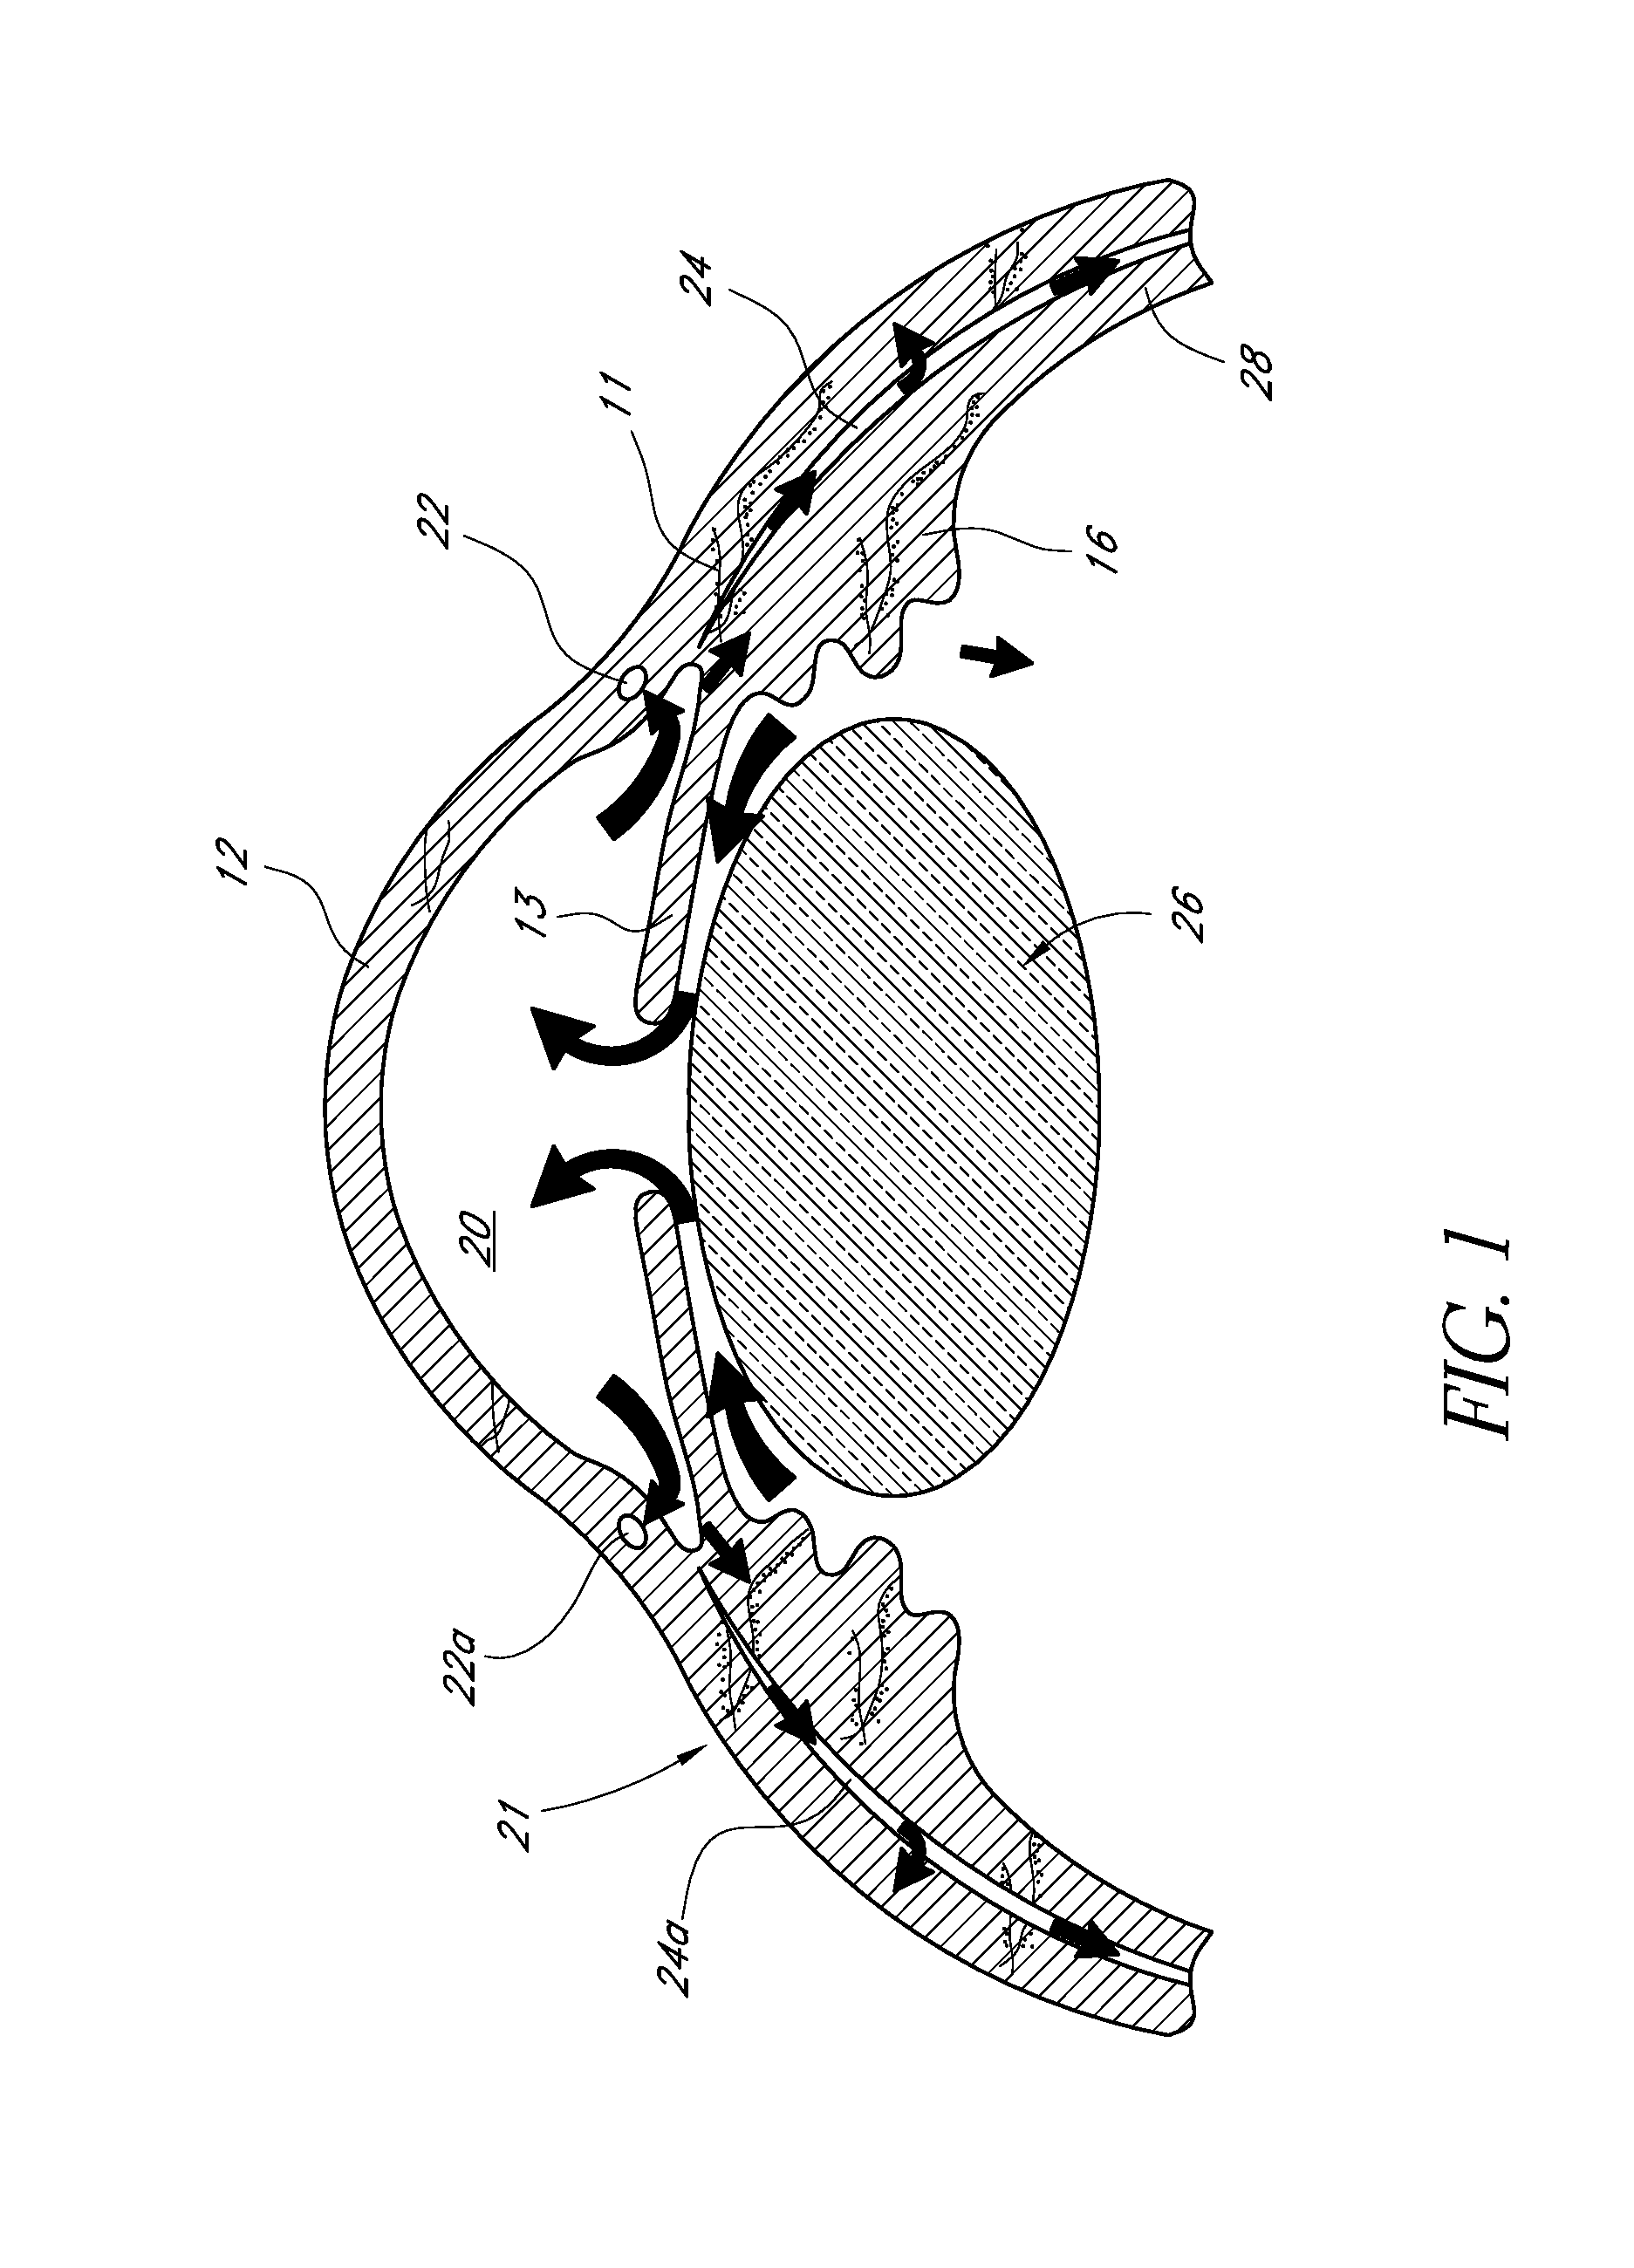 Uveoscleral drug delivery implant and methods for implanting the same